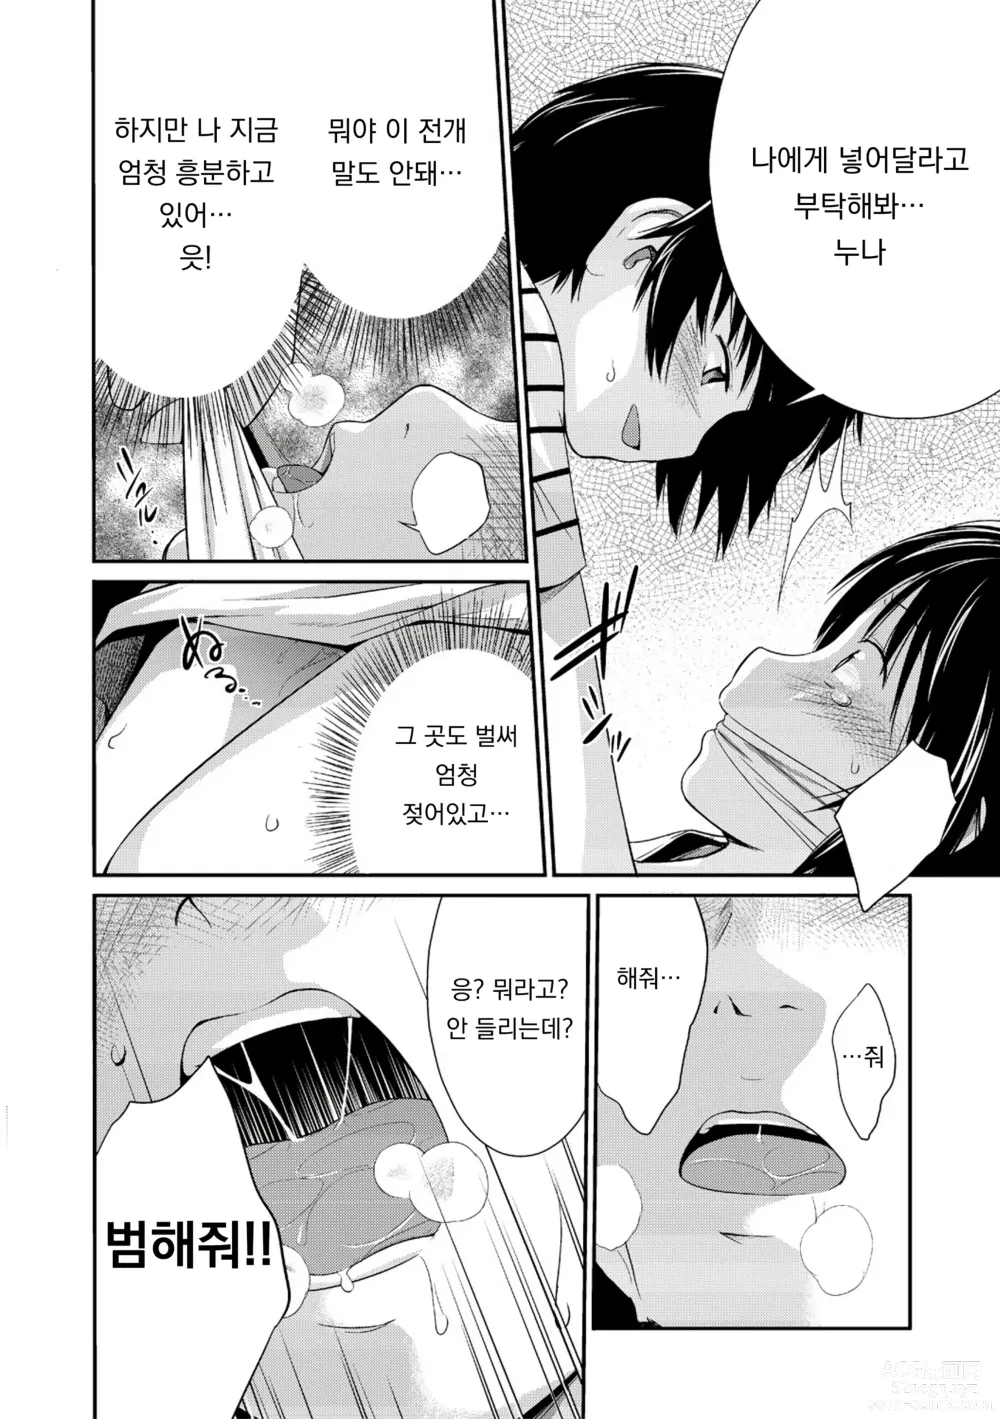 Page 129 of manga 누나♥LOVER Ch. 01-06